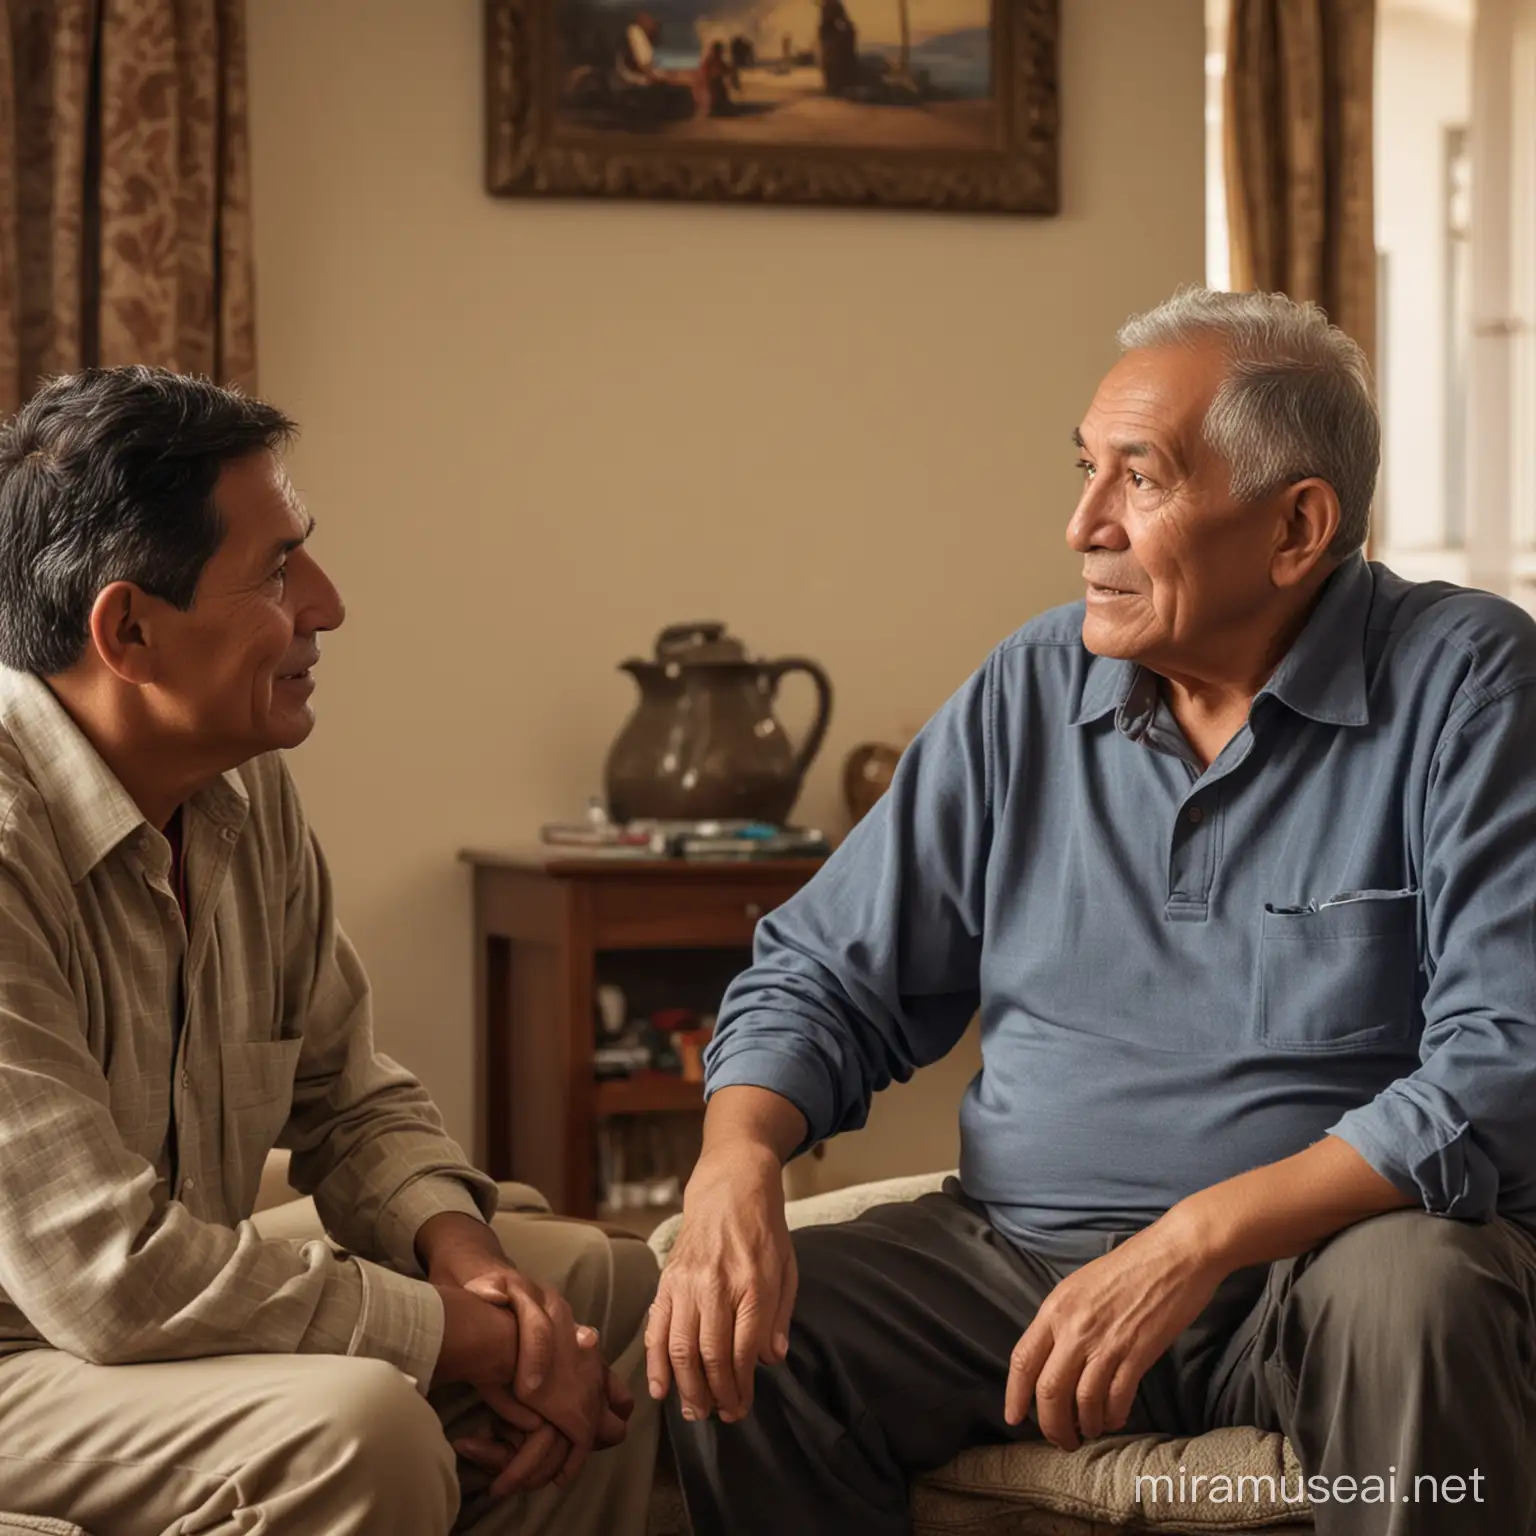 Intergenerational Bonding Elderly Peruvian Father and MiddleAged Son Engaging in Conversation